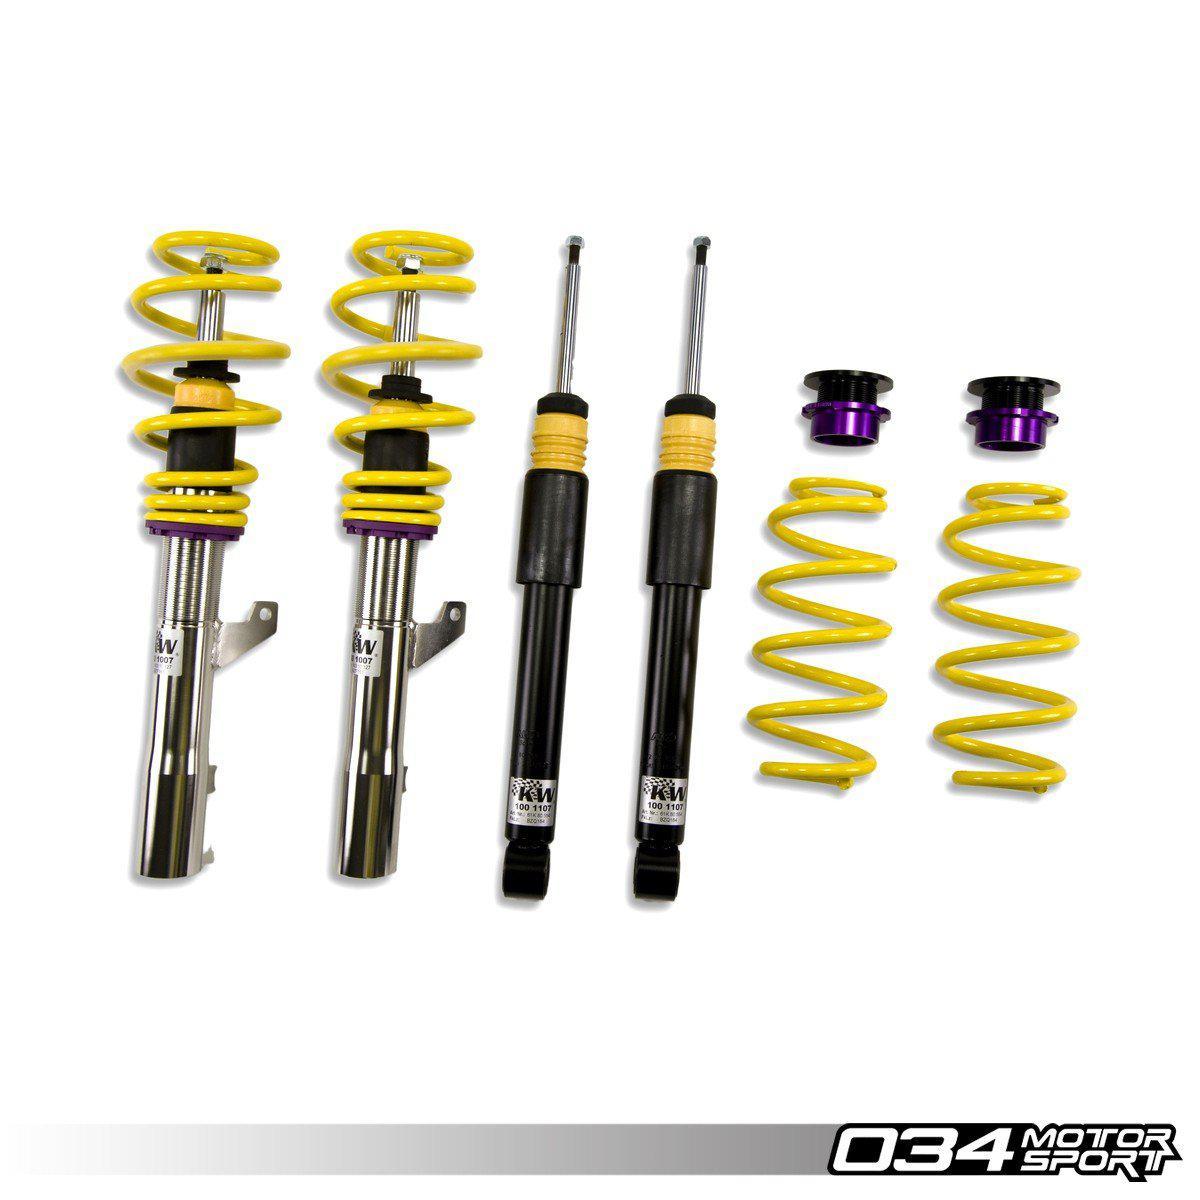 KW Variant 1 Coilover Suspension, B8/B8.5 Audi Q5/SQ5 Without Edc-A Little Tuning Co